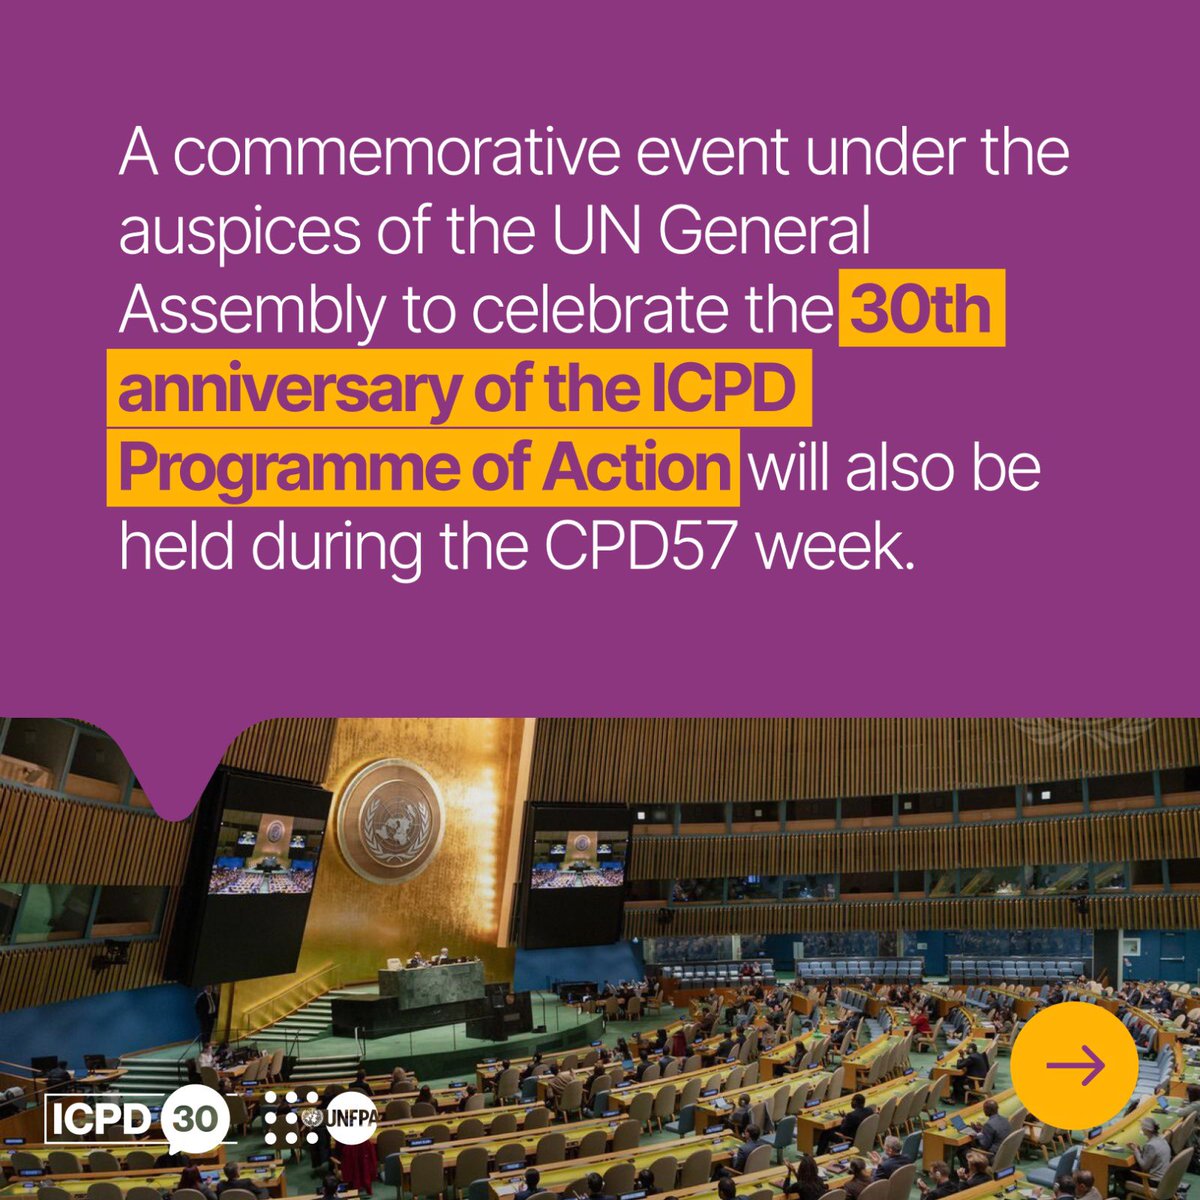 🇿🇼 participates in the #CPD57 commemorations in New York. The delegation is led by @MoHCCZim Minister Hon Dr. Mombeshora. UNFPA🇿🇼 Rep @MirandaTabifor & ICPD Task Force Team member Dr. L Gondongwe are also part of the delegation. Learn more about the significance of #CPD57.